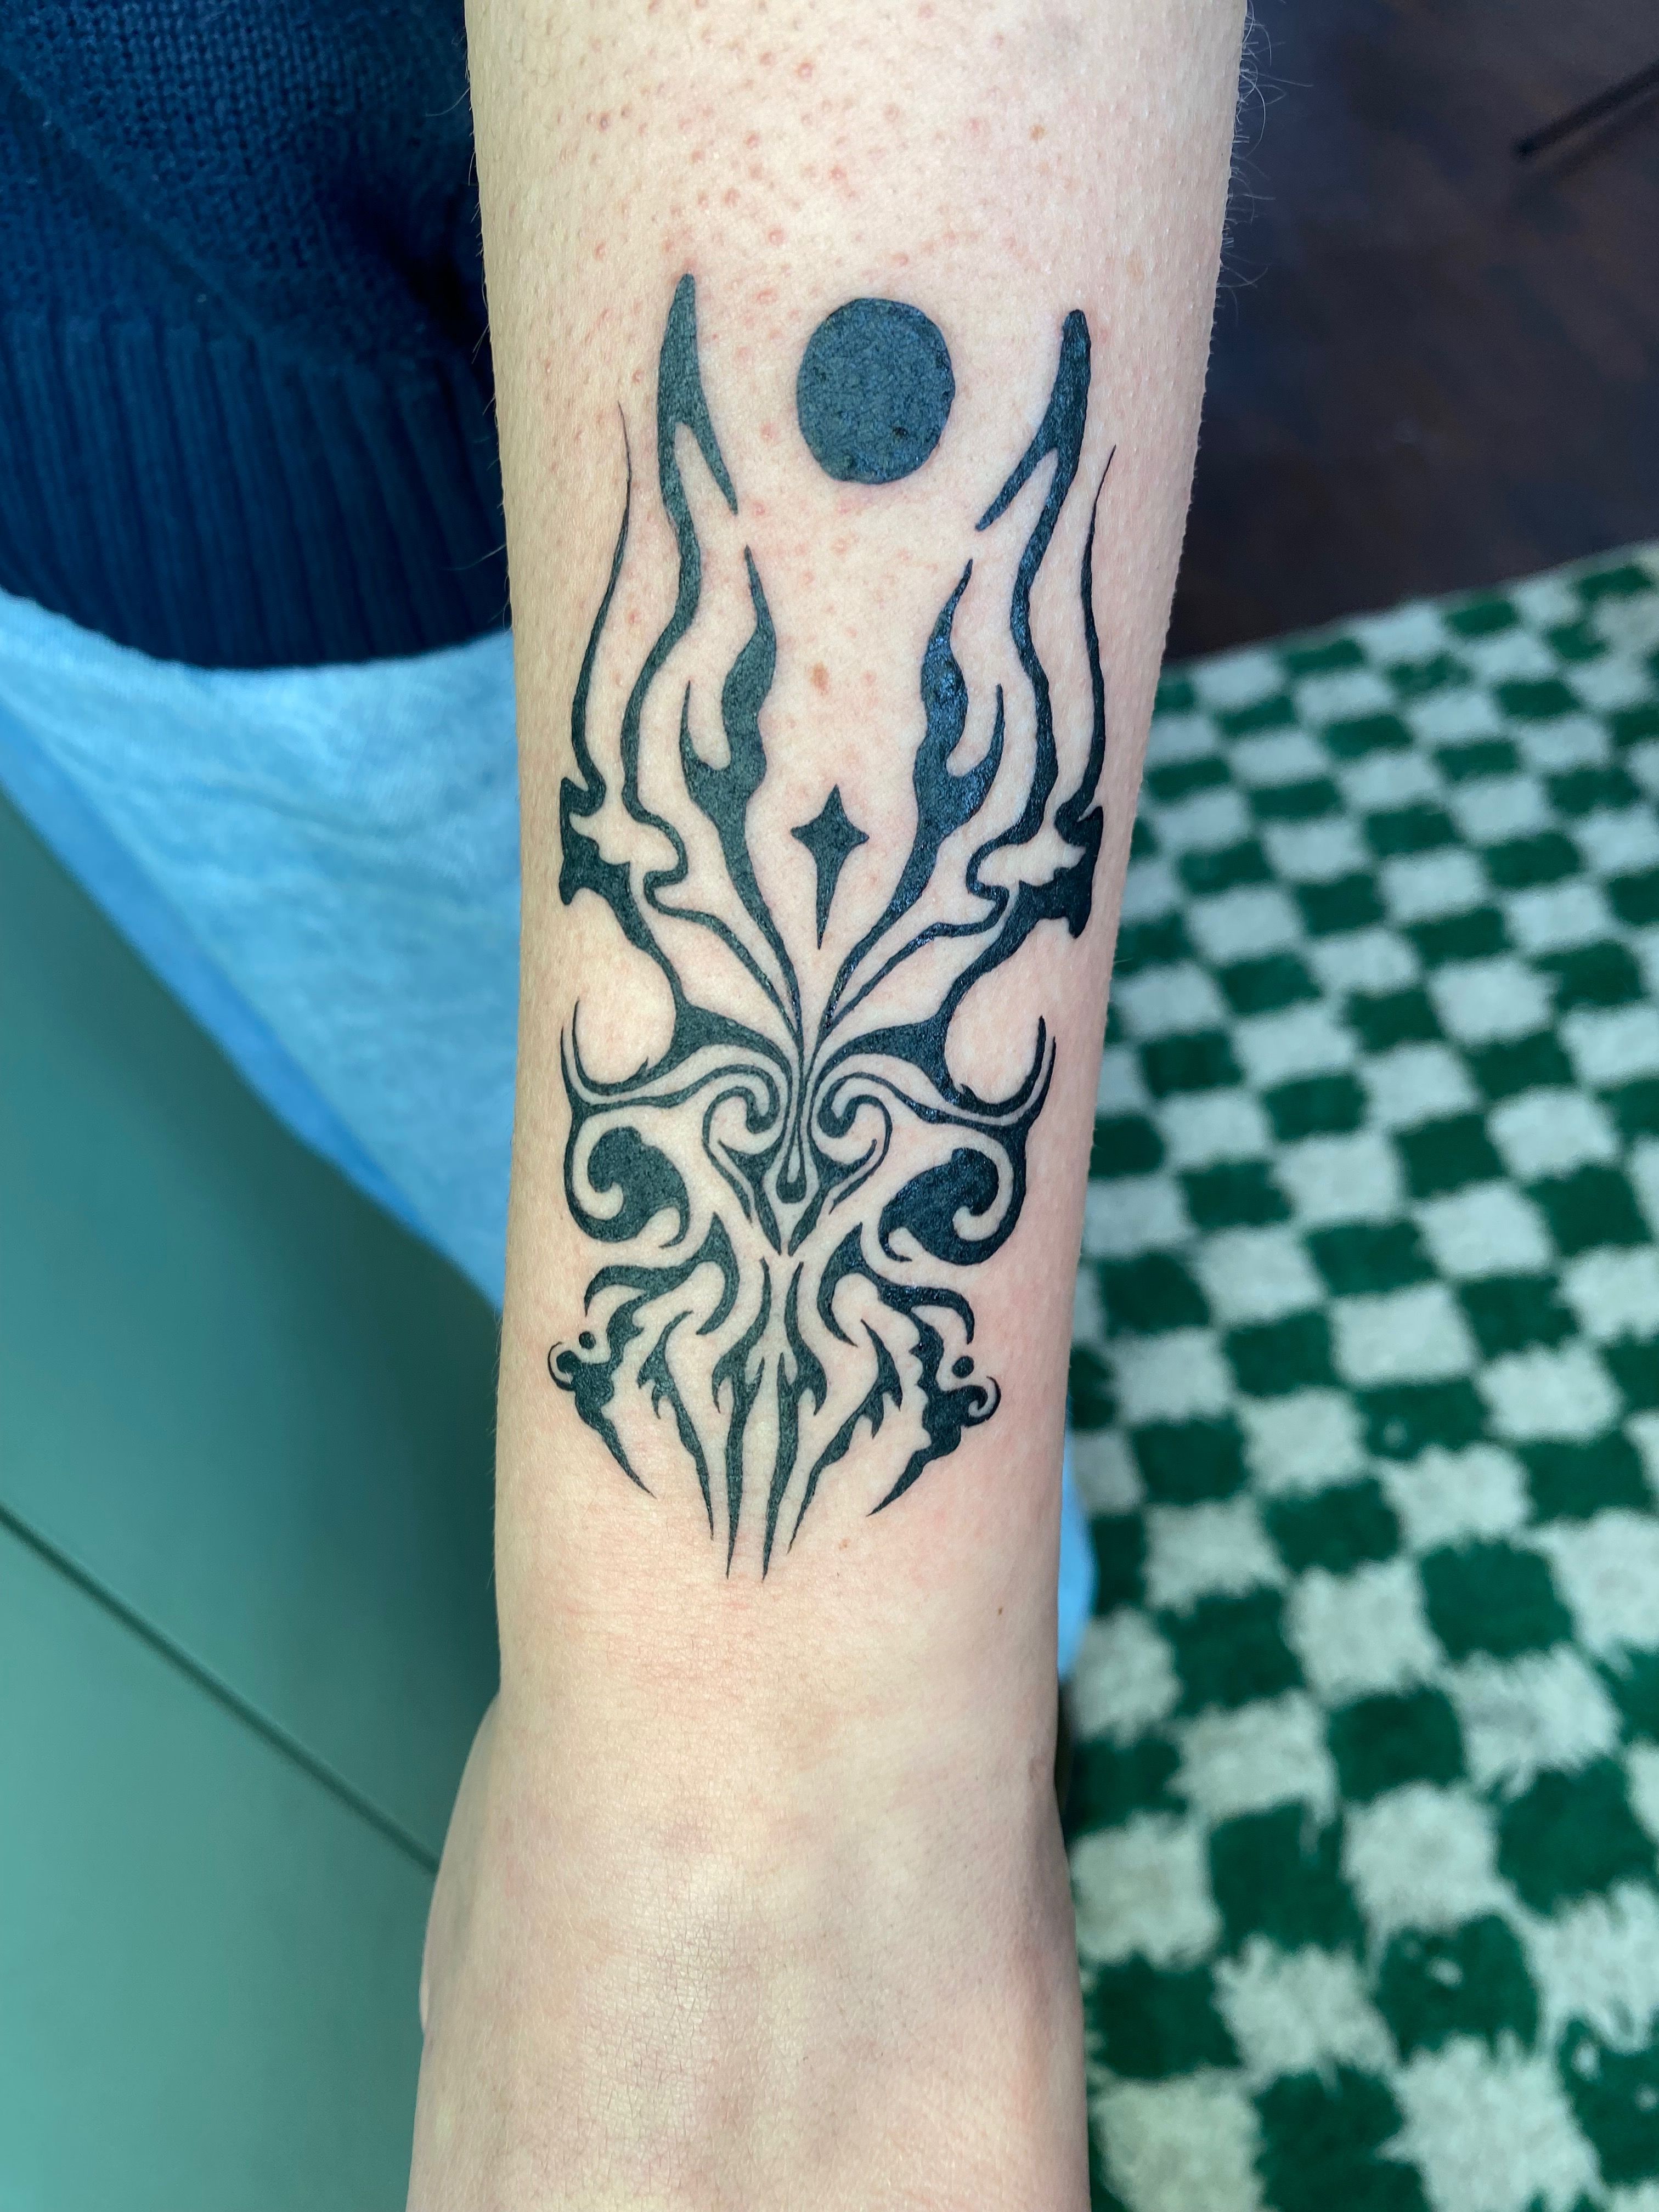 ☆LLeweLLyn Mejia☆ FOLK tattoos | Grim reaper walking on by, with love  bracelet and a buncha other things that go together, psychedelic baby sun  god on the finger, a saint... | Instagram